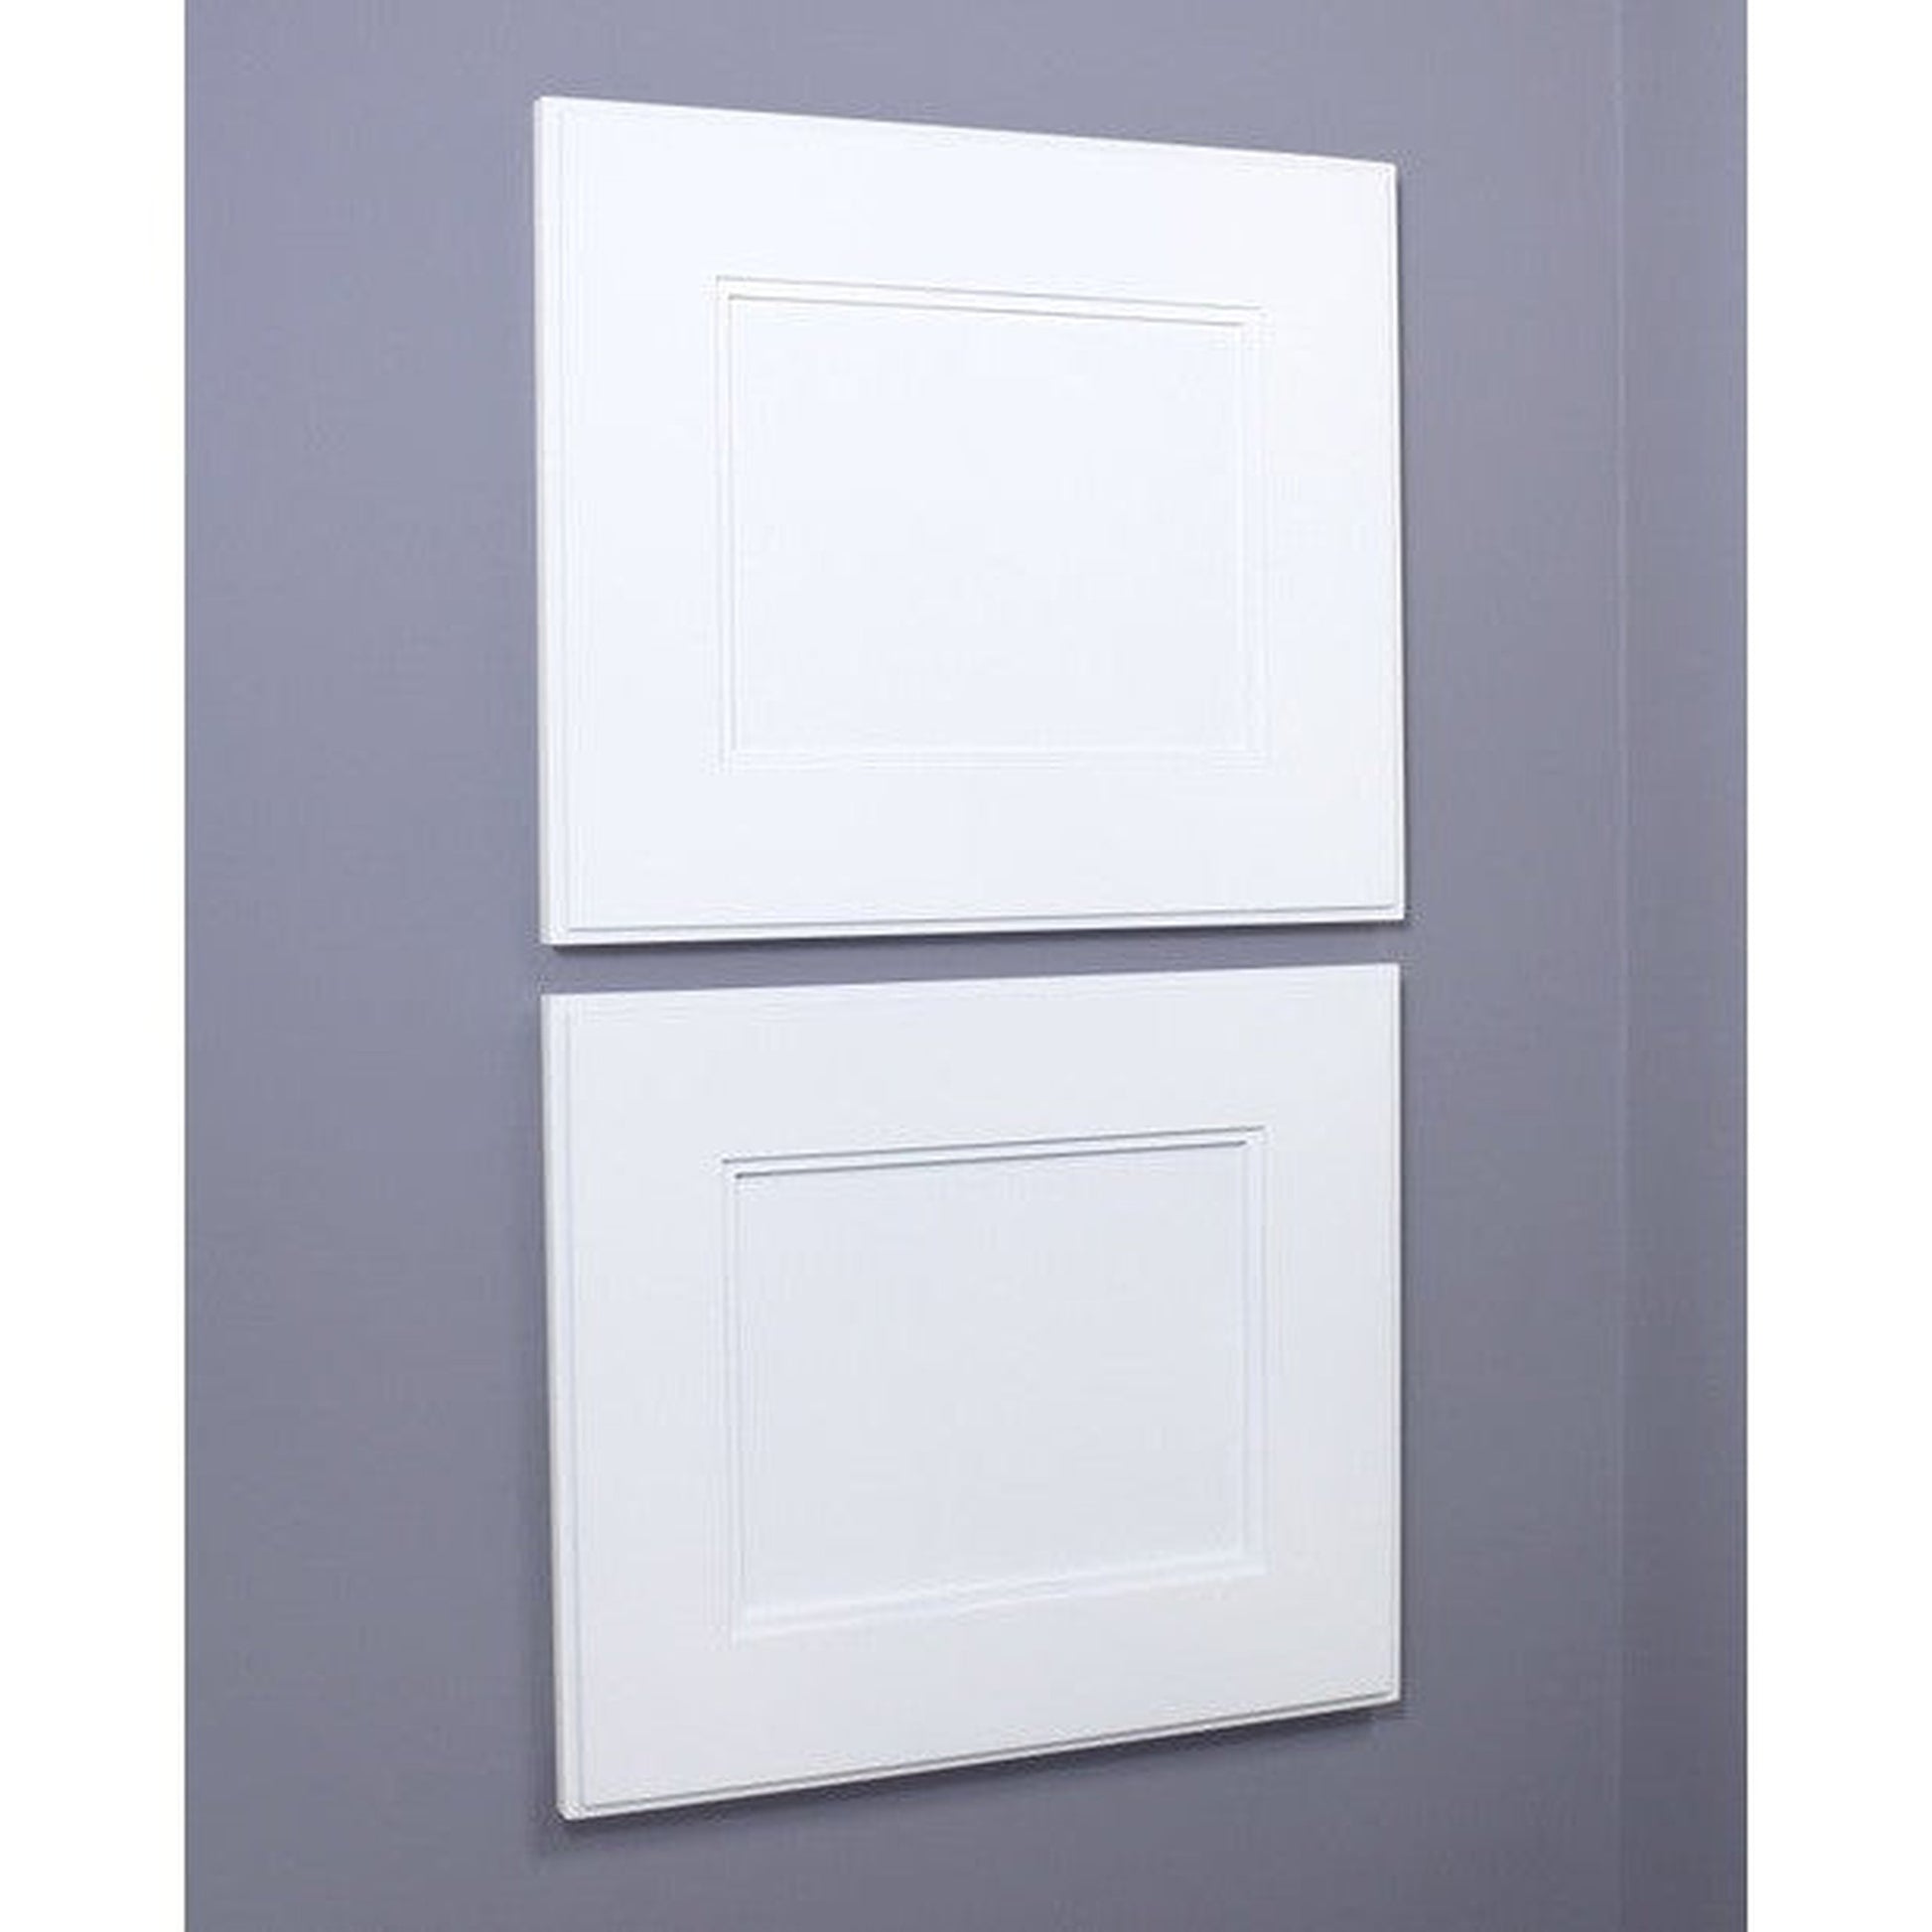 Fox Hollow Furnishings 11" x 14" White Compact Landscape Shaker Style Standard 4" Depth Recessed Medicine Cabinet